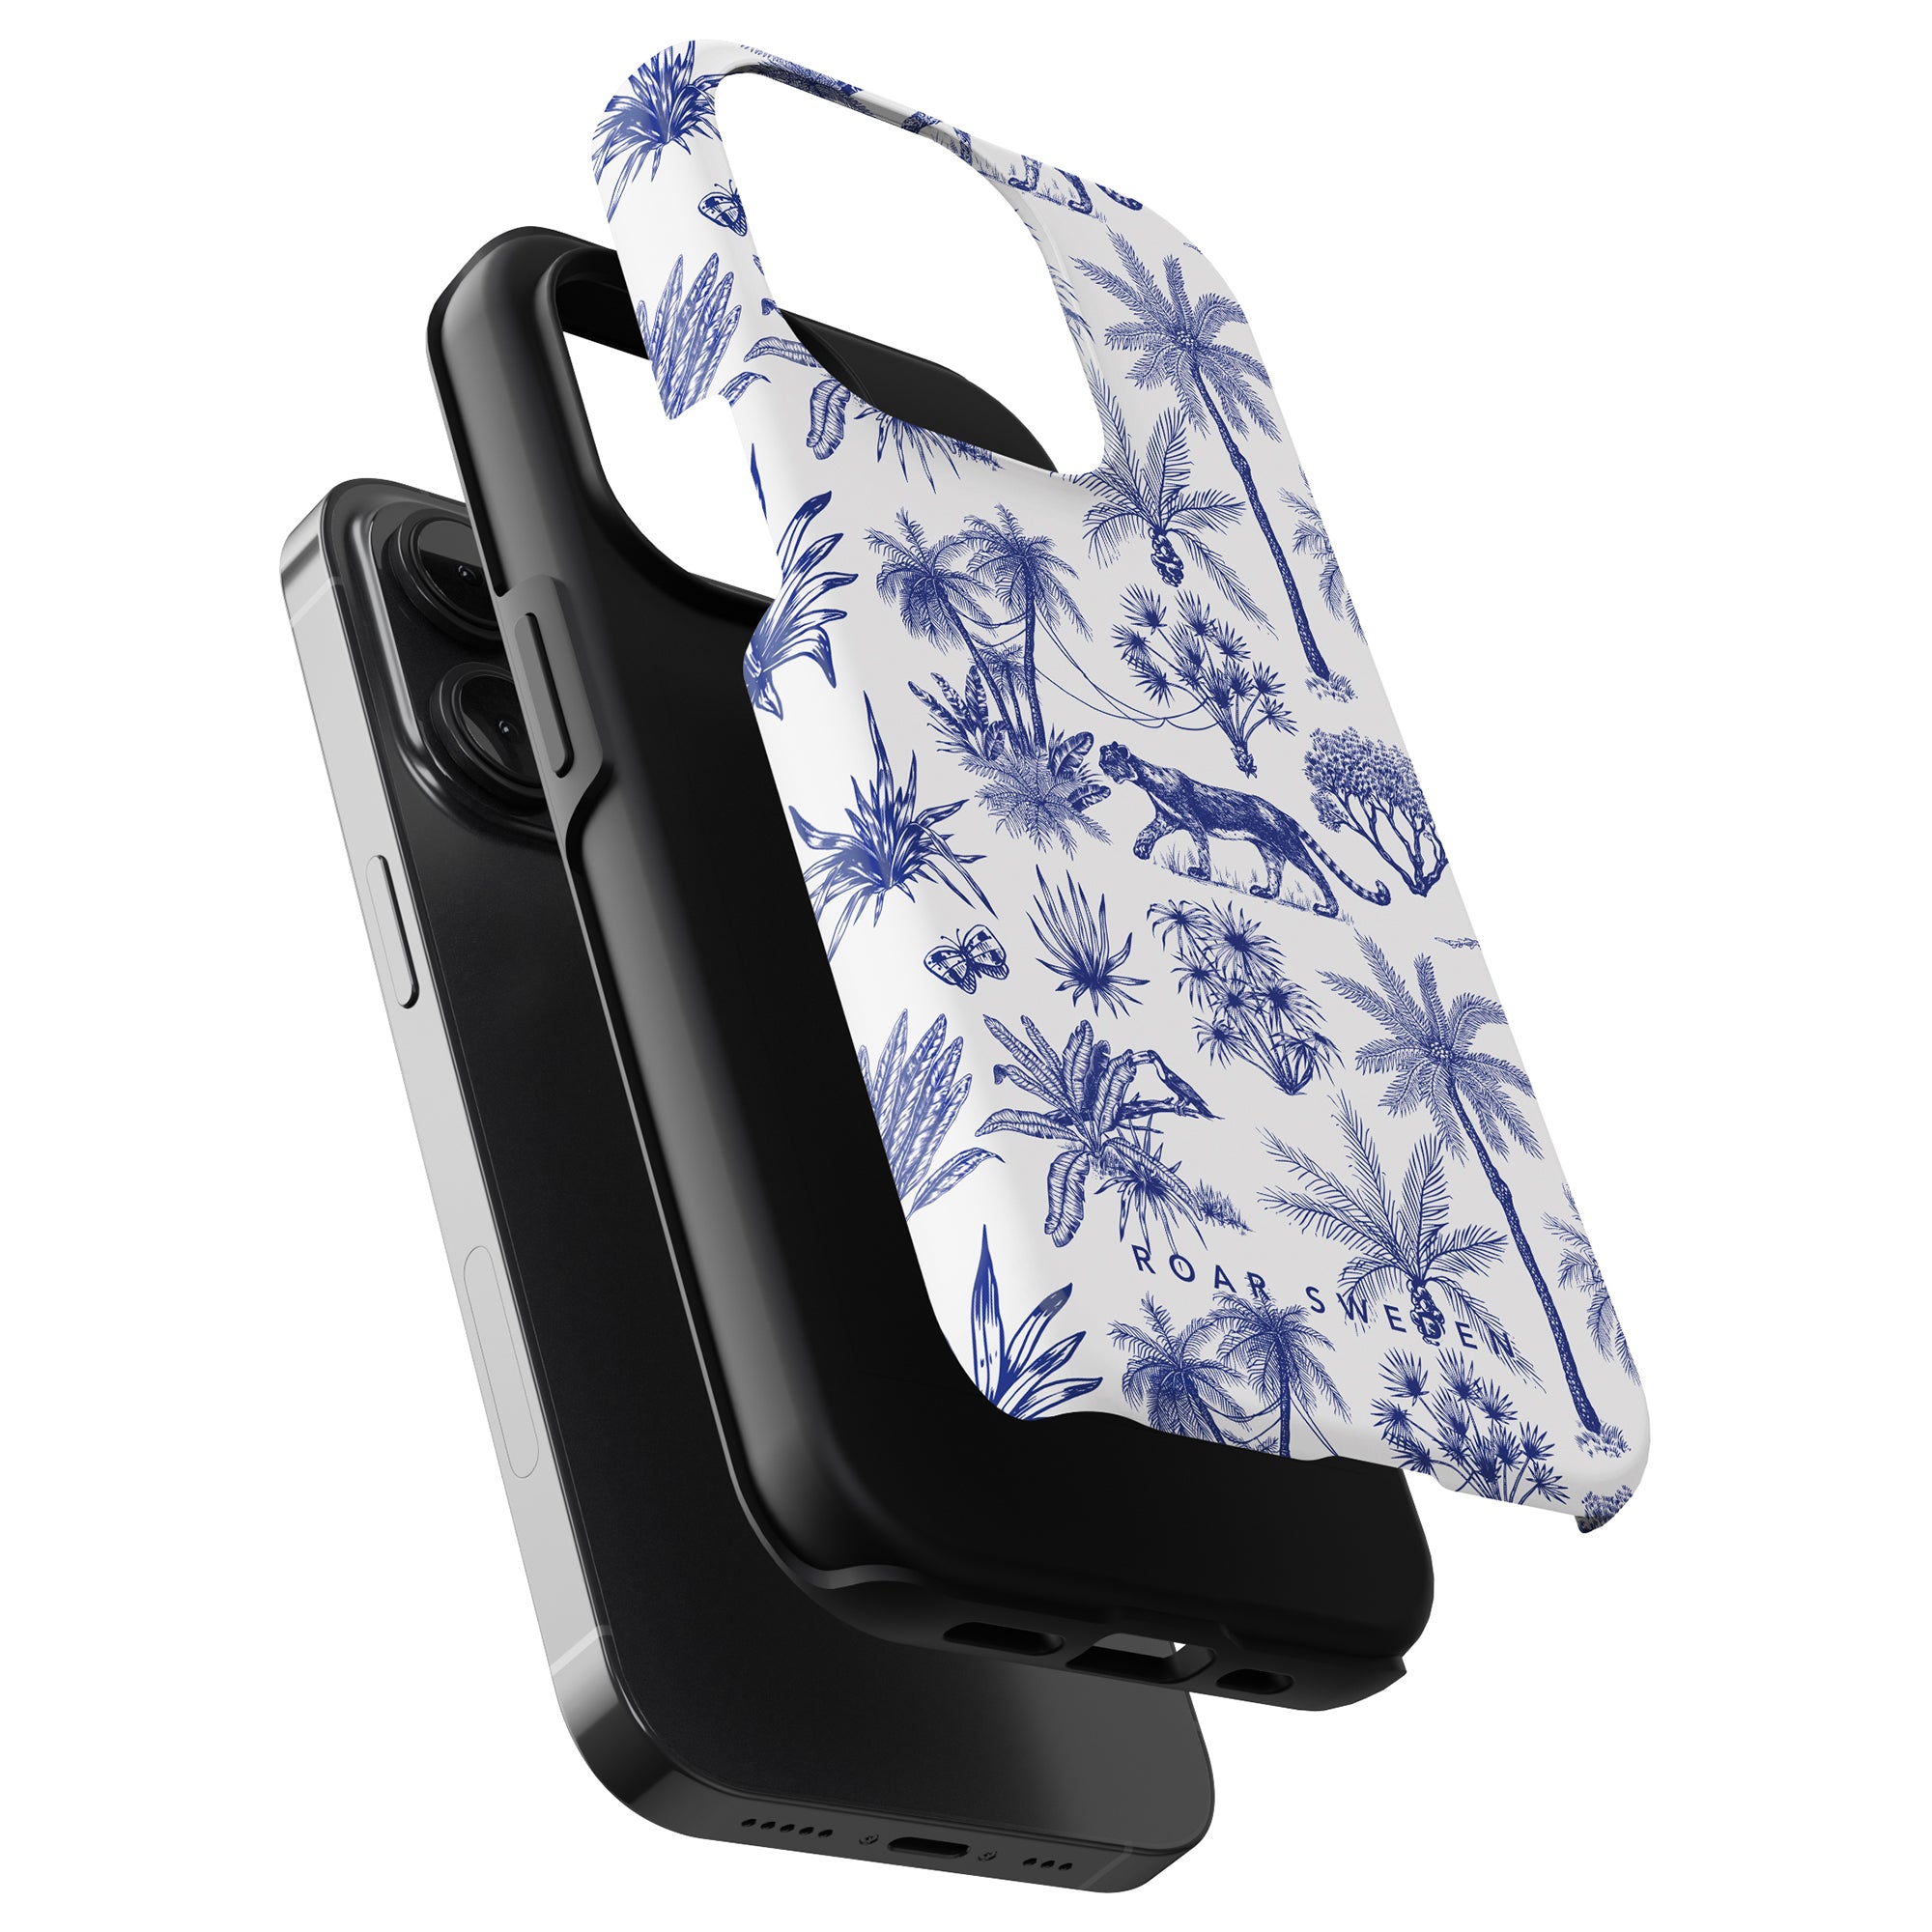 Smartphones with Toile De Jouy - Tough Cases from the jungle collection and a blue and white floral-patterned popsocket.